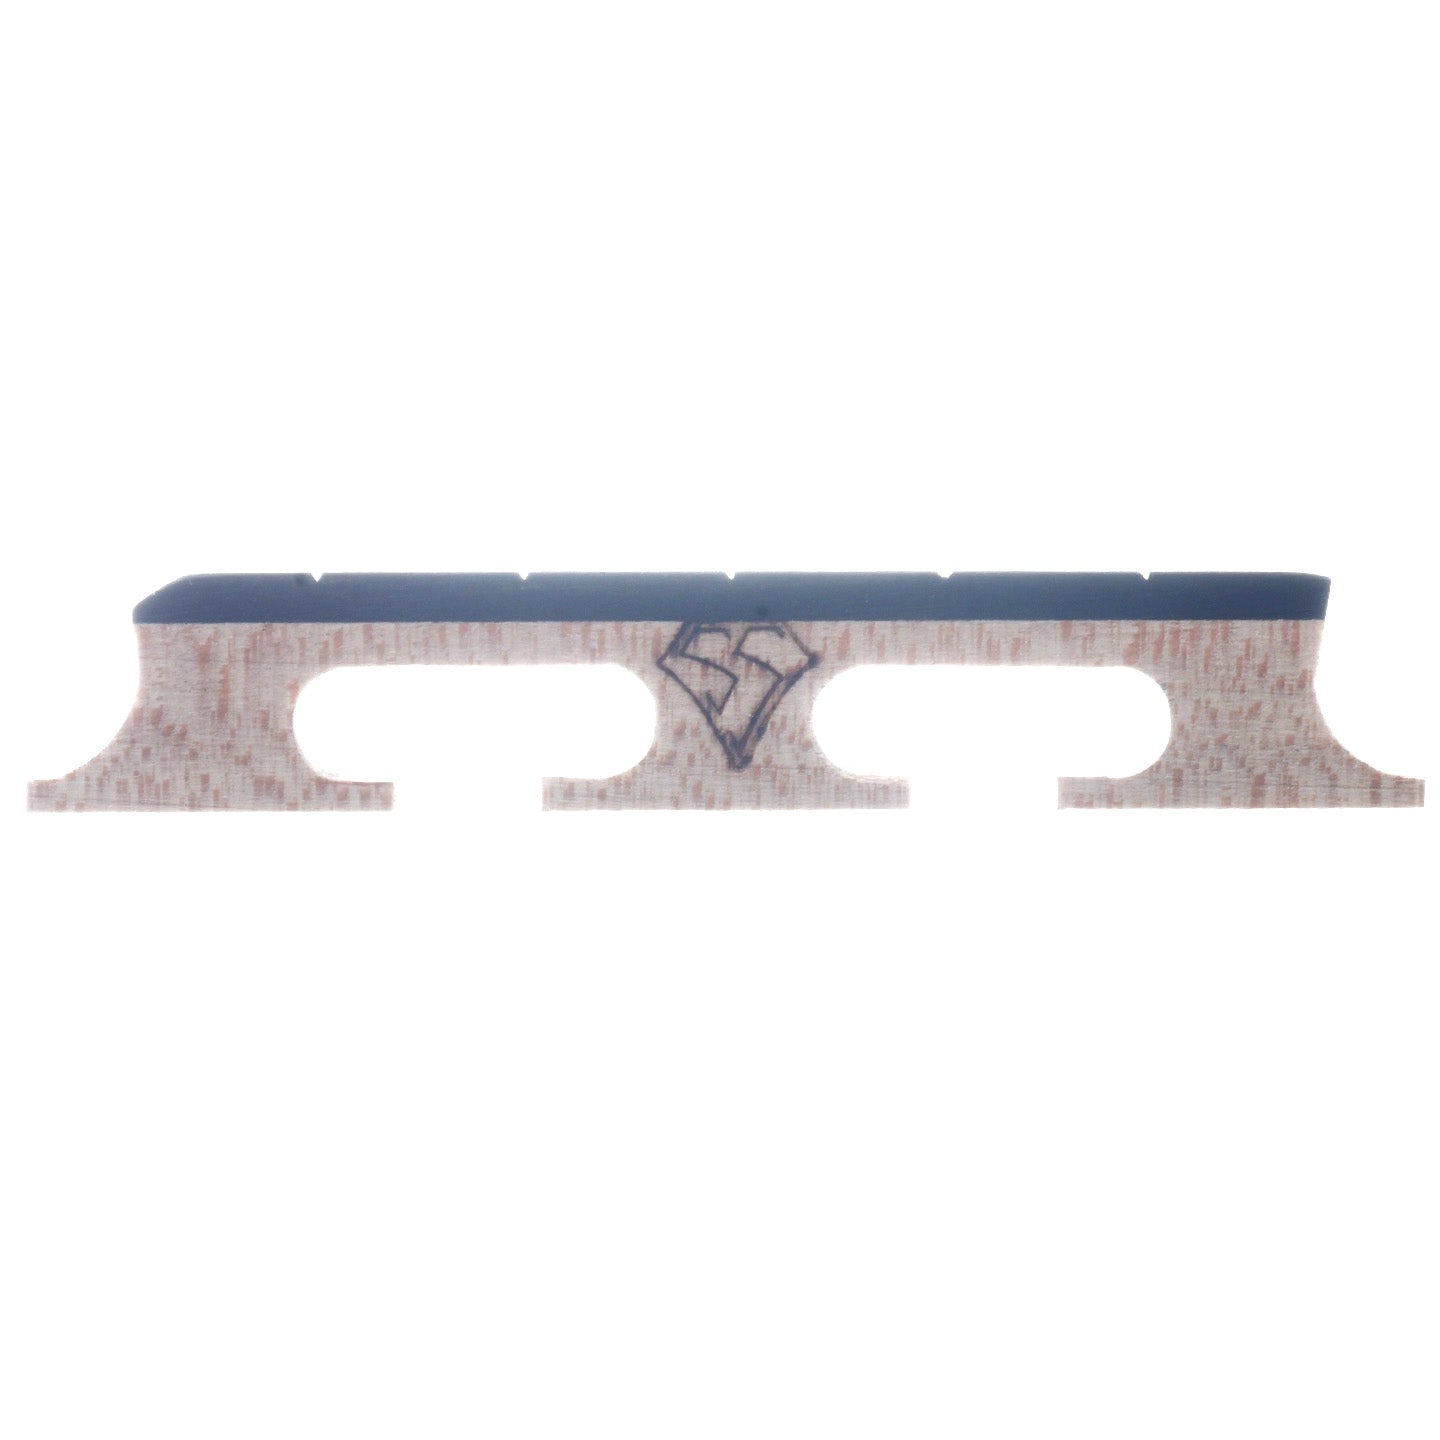 Image 2 of Snuffy Smith New Generation Banjo Bridge, 1/2" High with Crowe Spacing - SKU# SSNG-1/2-C : Product Type Accessories & Parts : Elderly Instruments